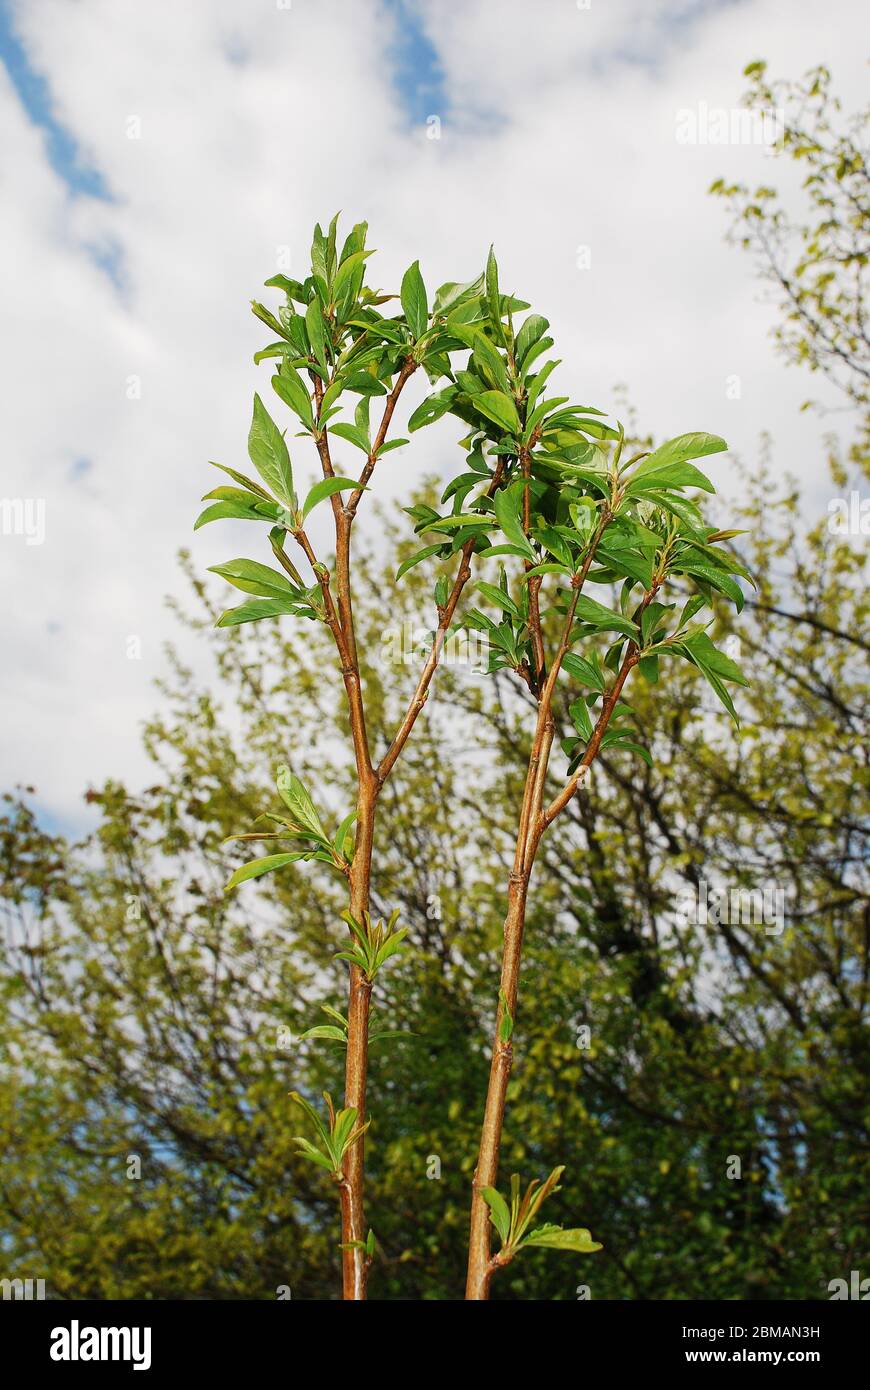 The young leaves growing on a European Bluefre Plum tree (Prunus Domestica) in spring (mid April) Stock Photo